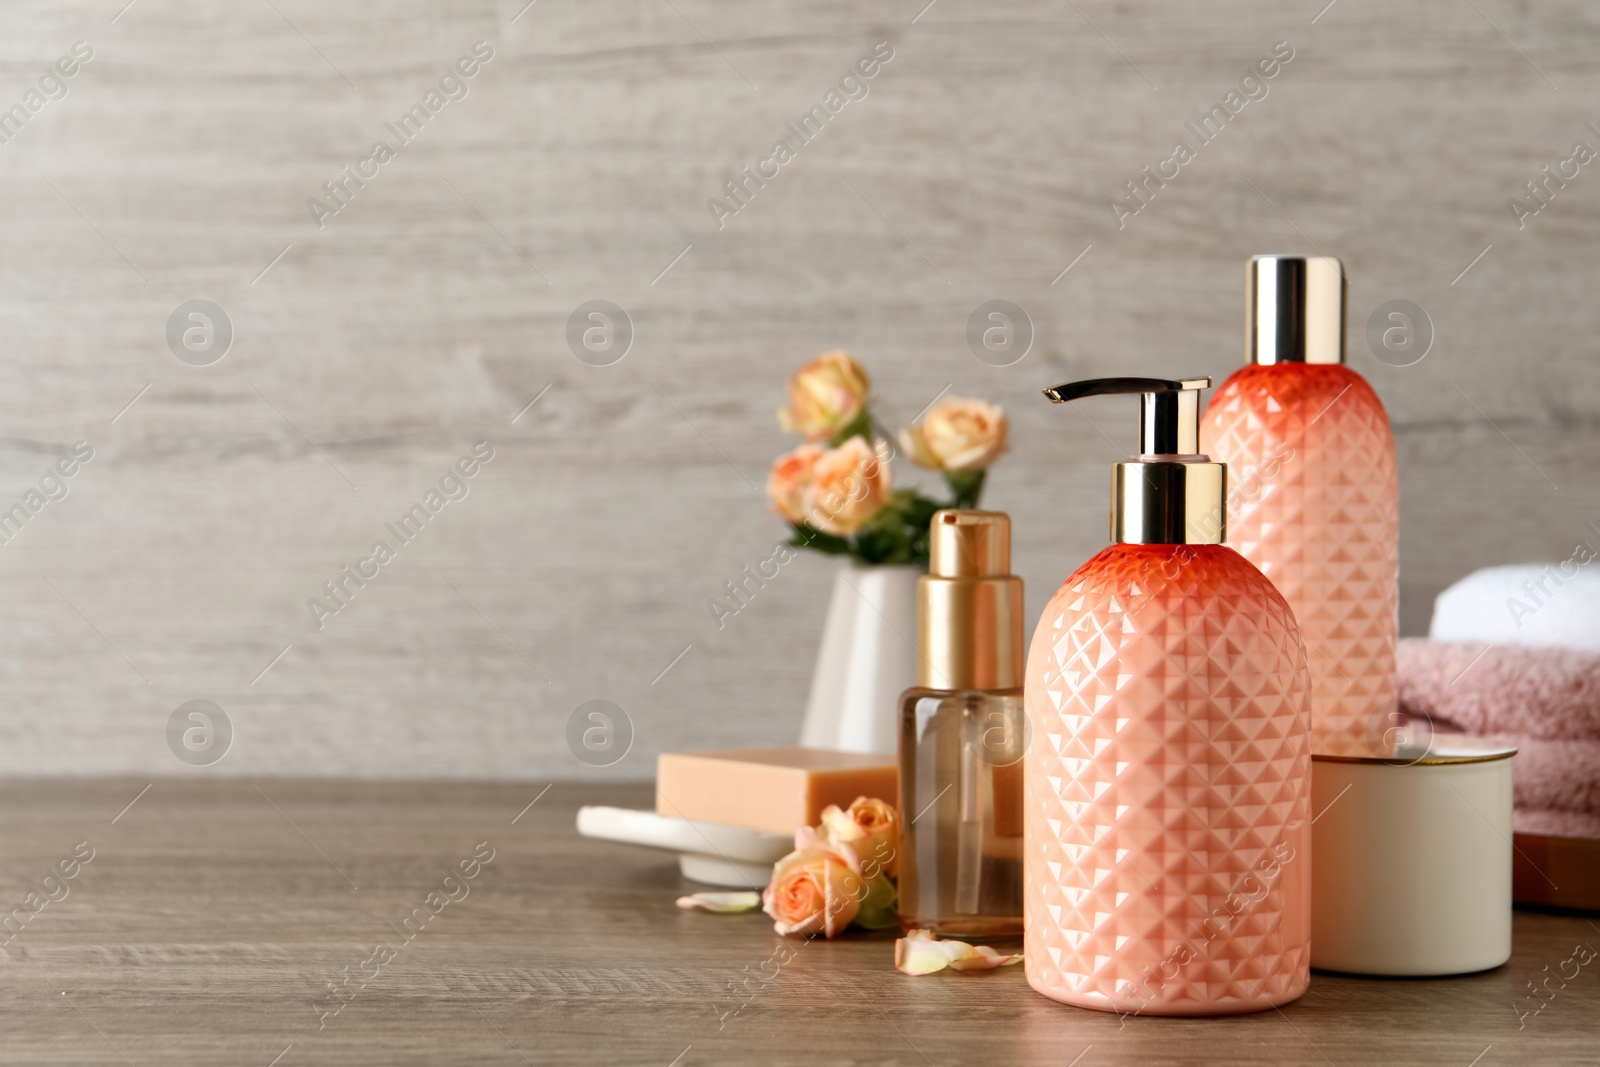 Photo of Stylish dispenser with liquid soap and other bathroom amenities on wooden table, space for text